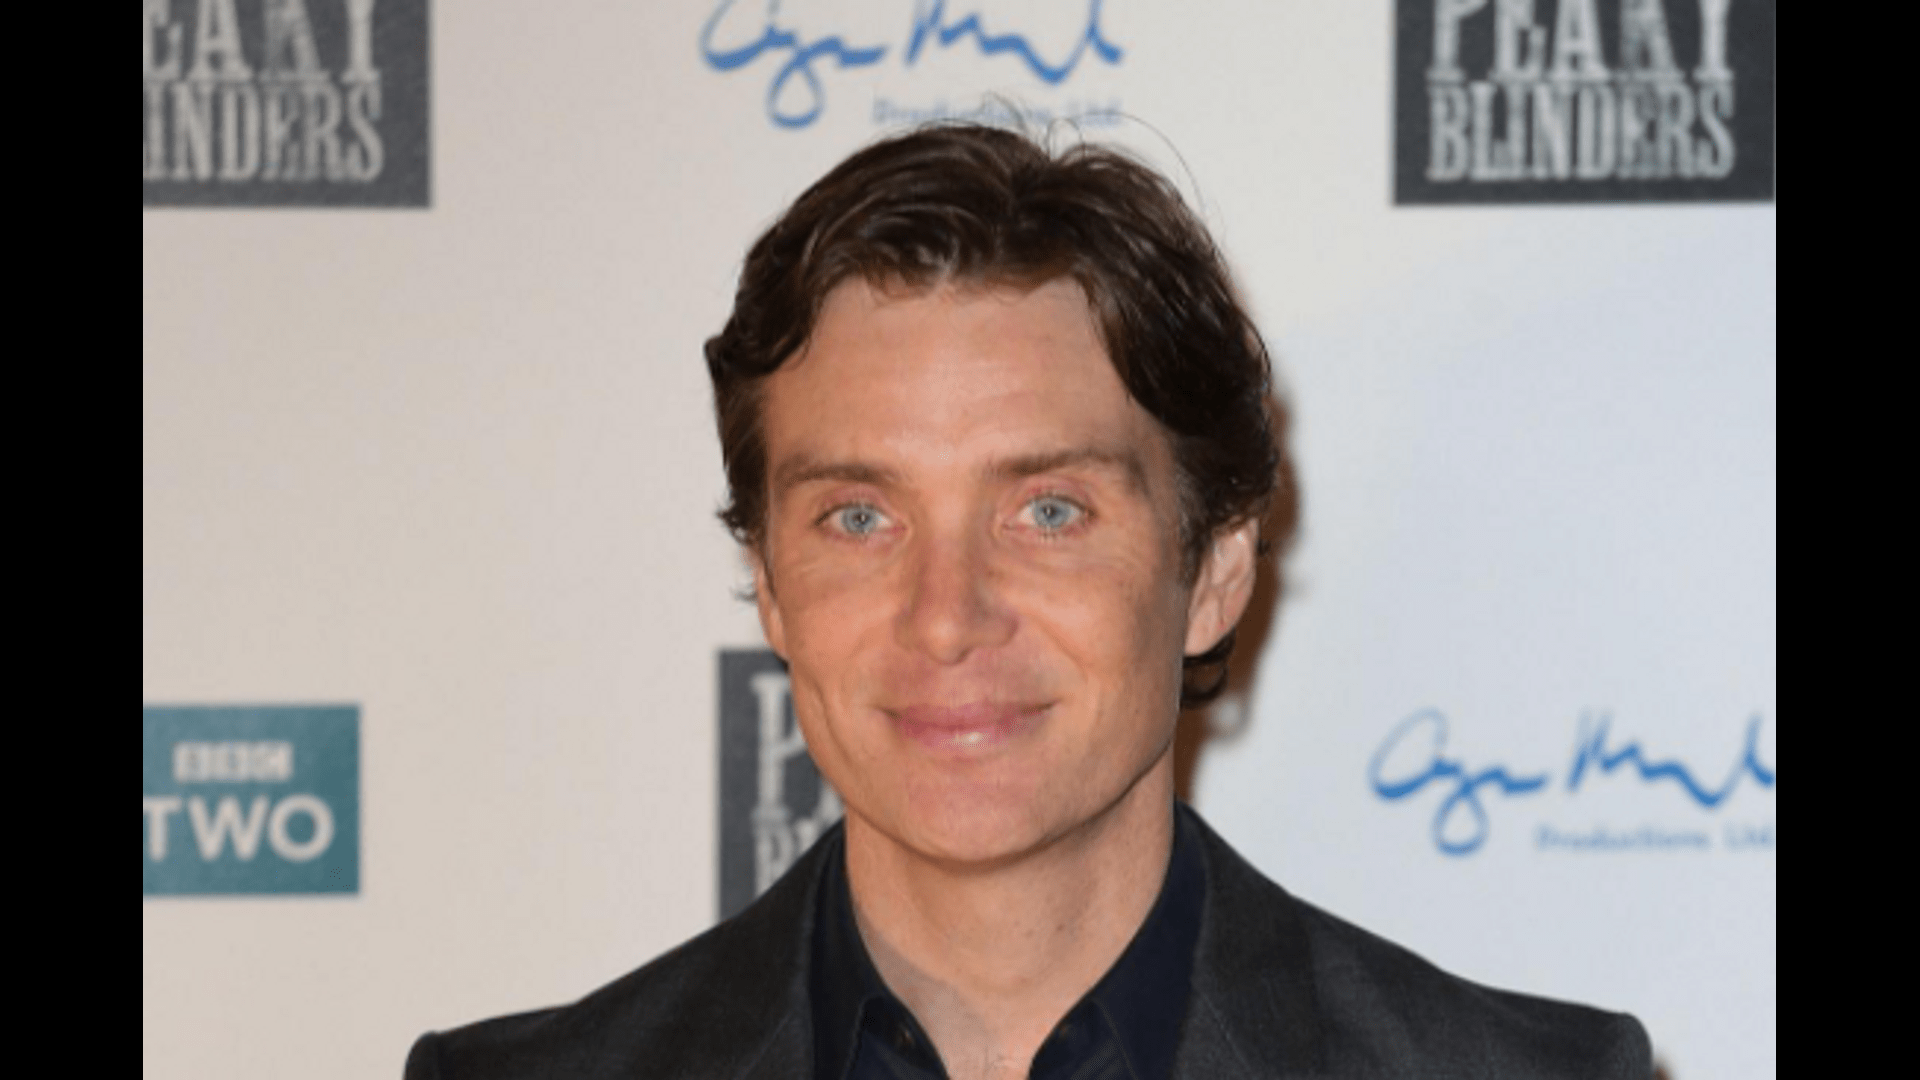 'Peaky Blinders' star returns to Ireland due to children's English accent